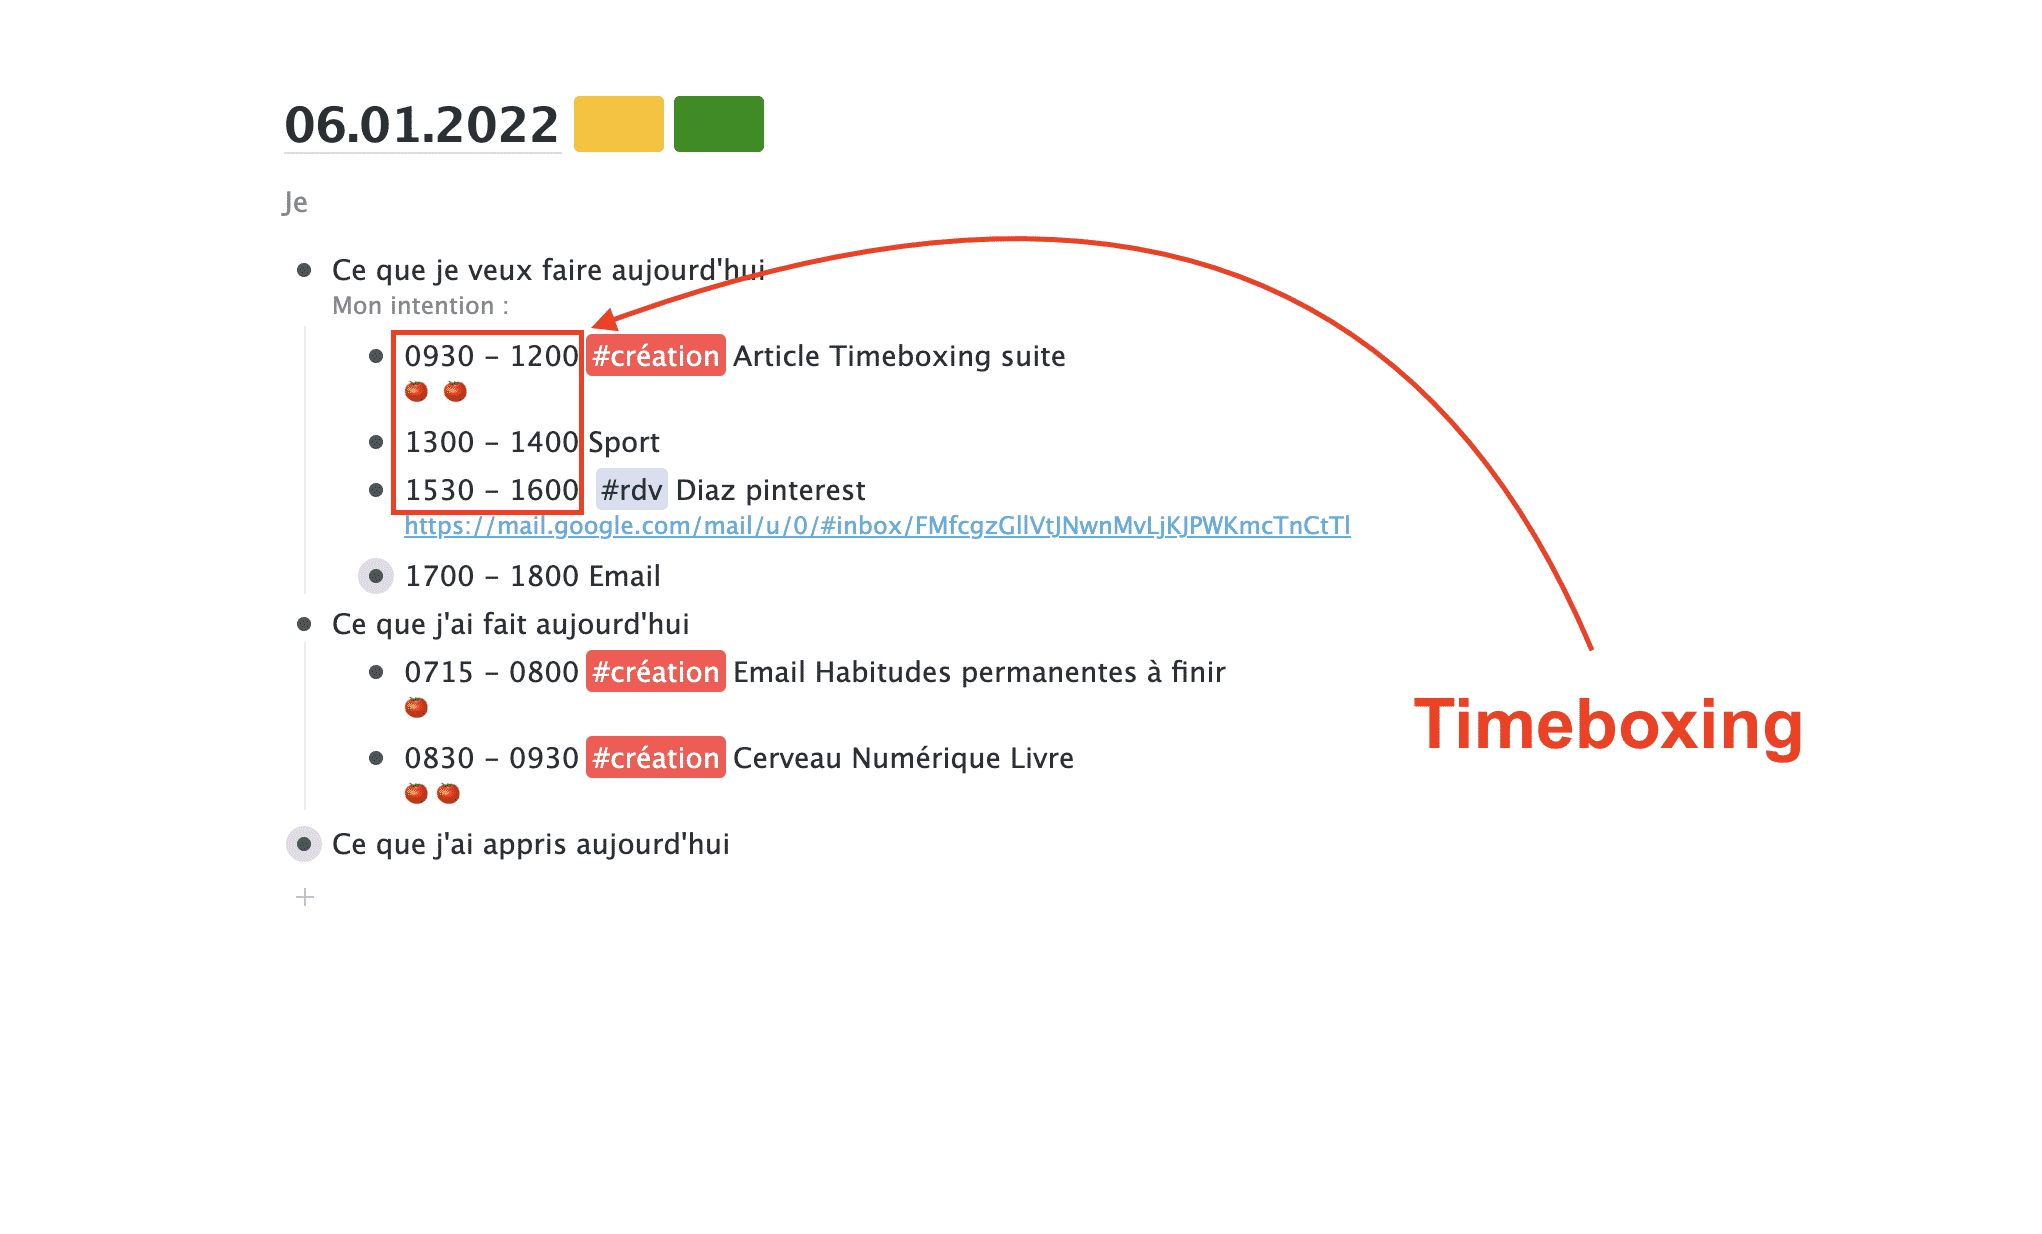 Time boxing workflowy